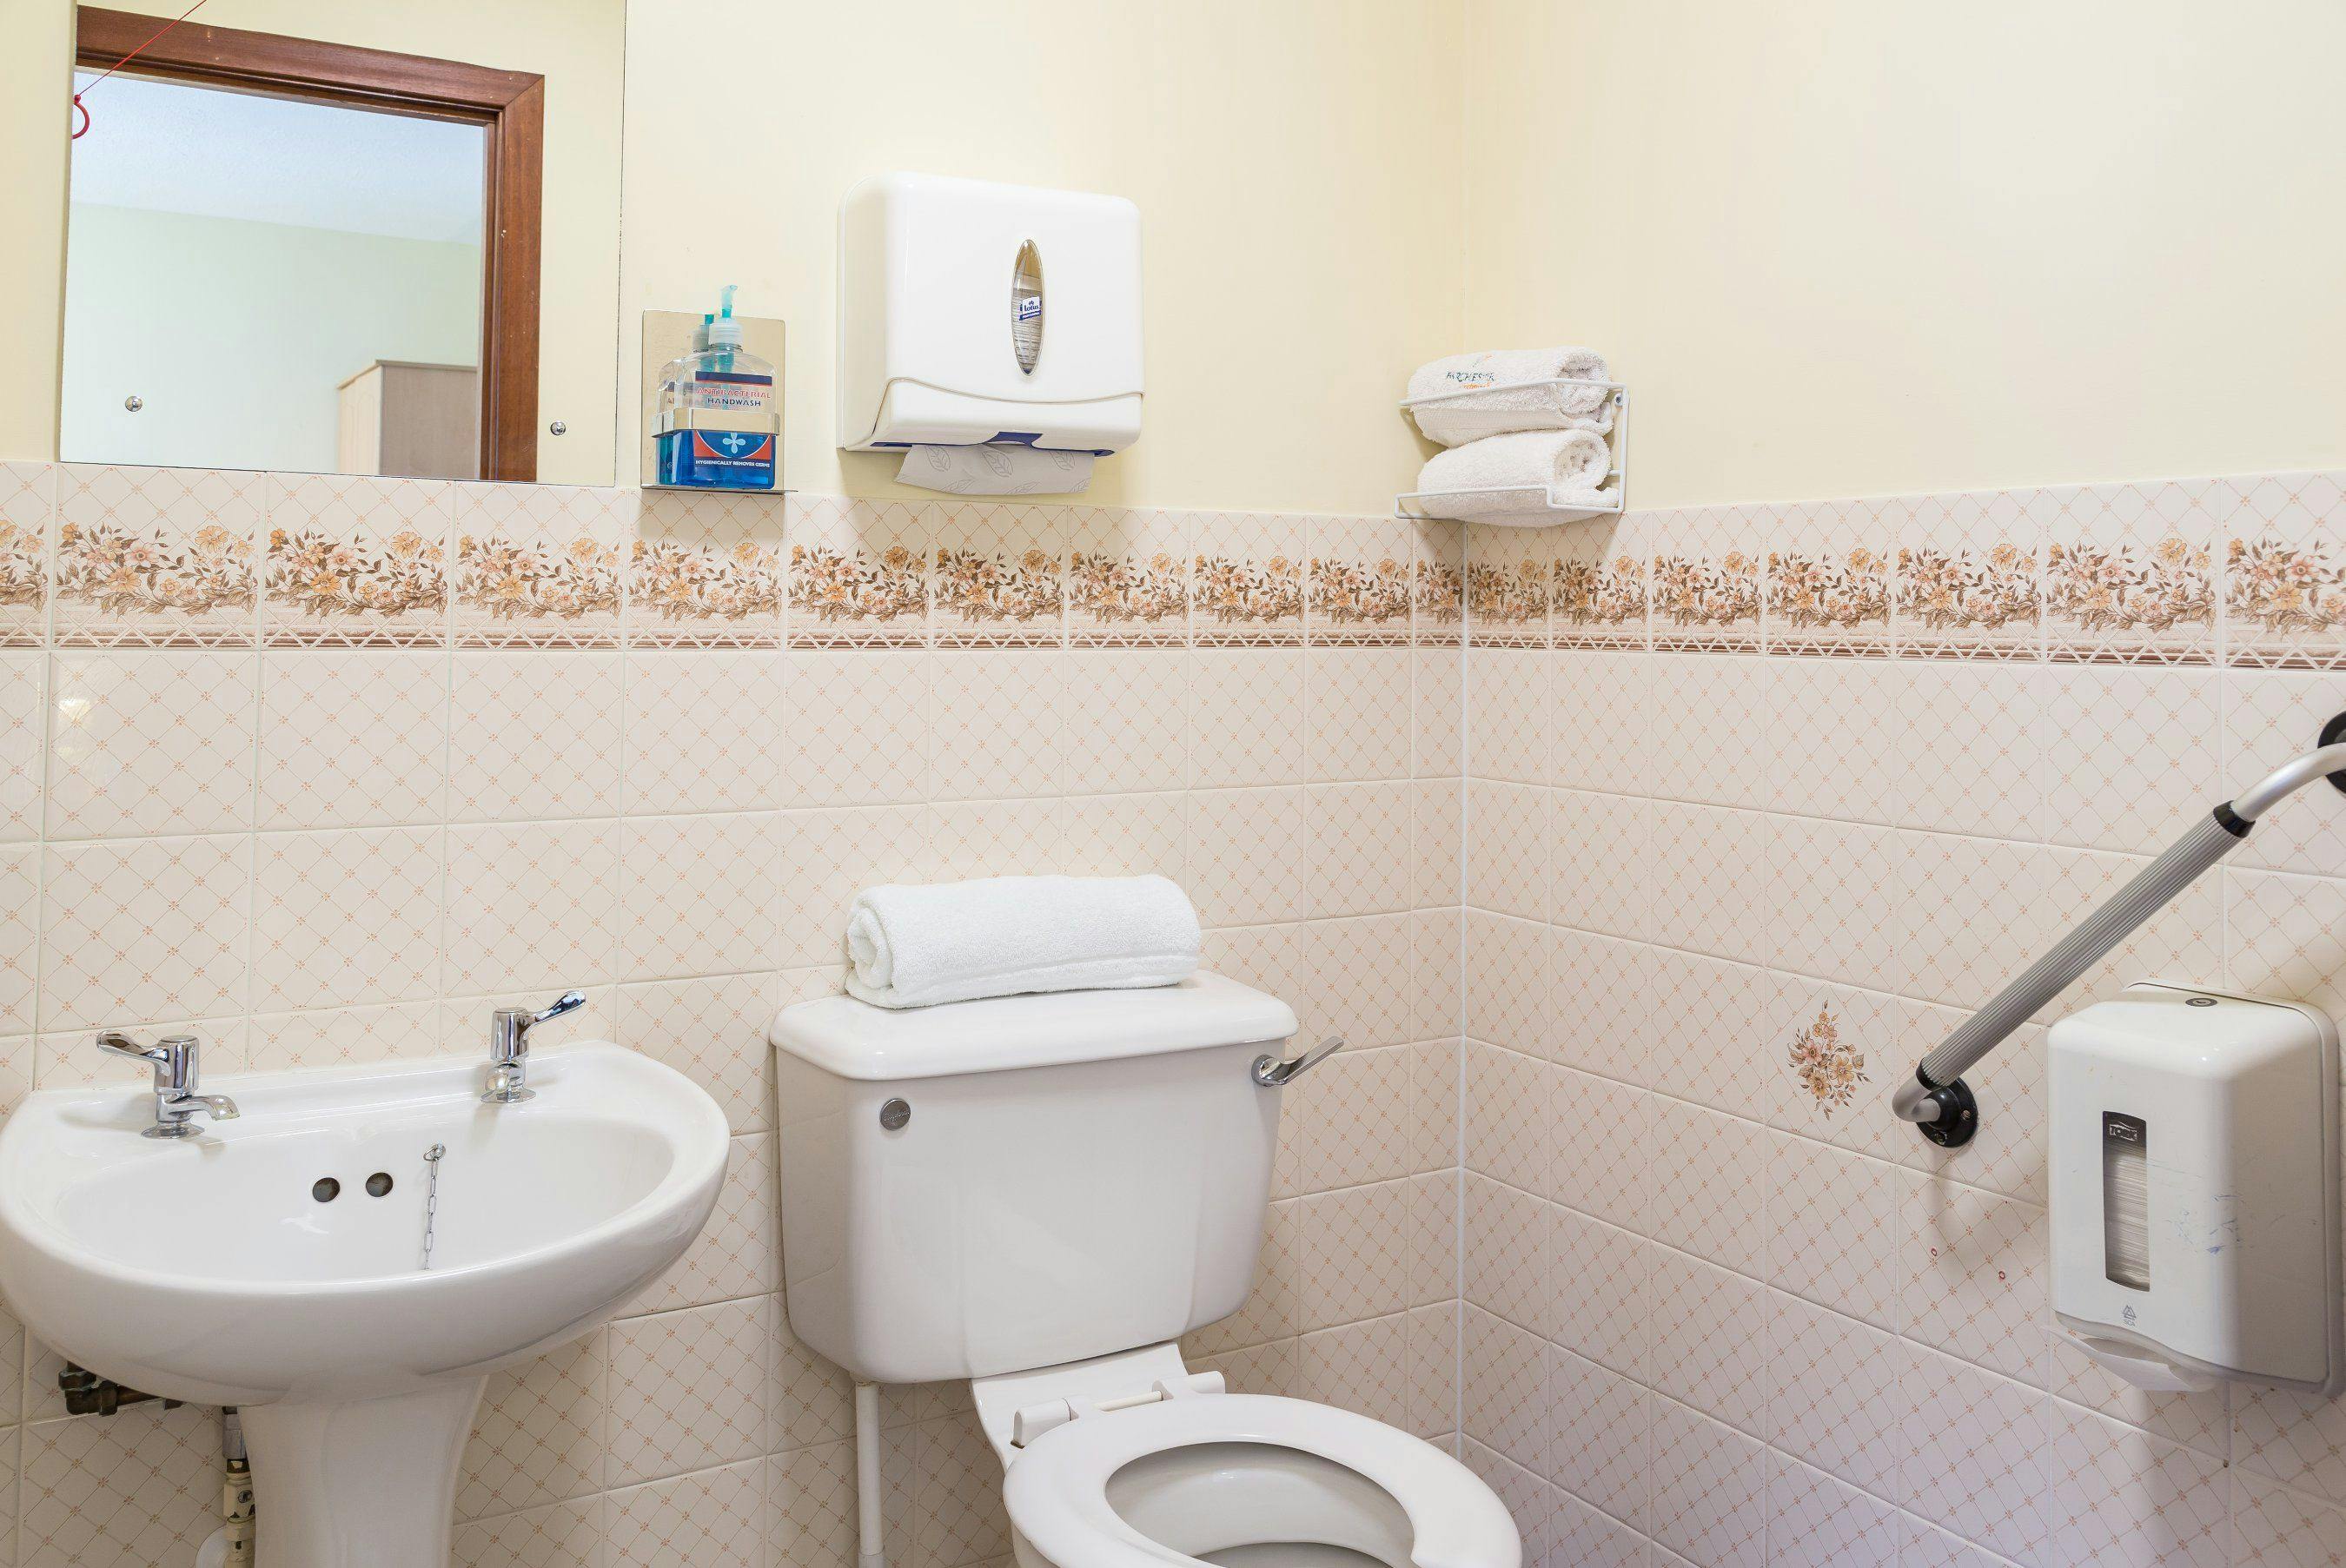 Bathroom at Pentland View Care Home in Thurso, Highland